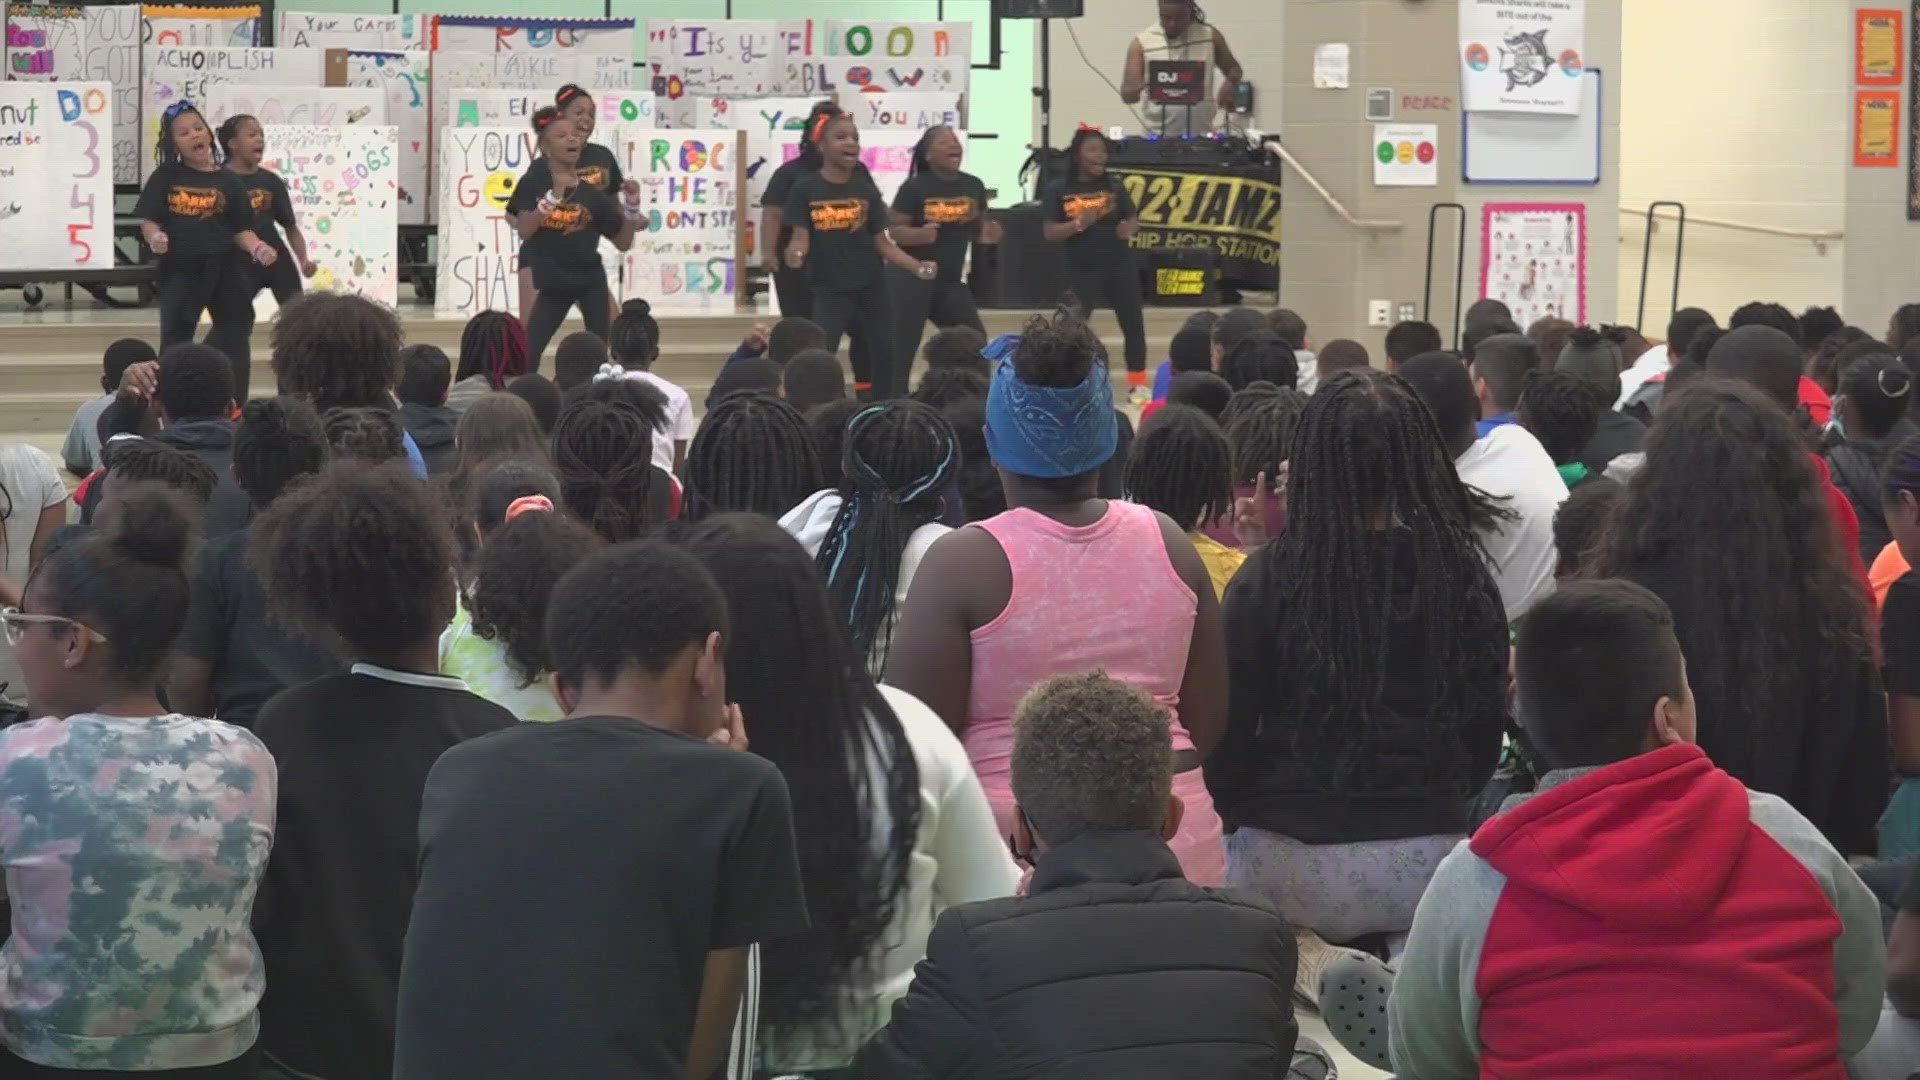 It's the school's first time hosting the pep rally, but leaders said it was a major success.